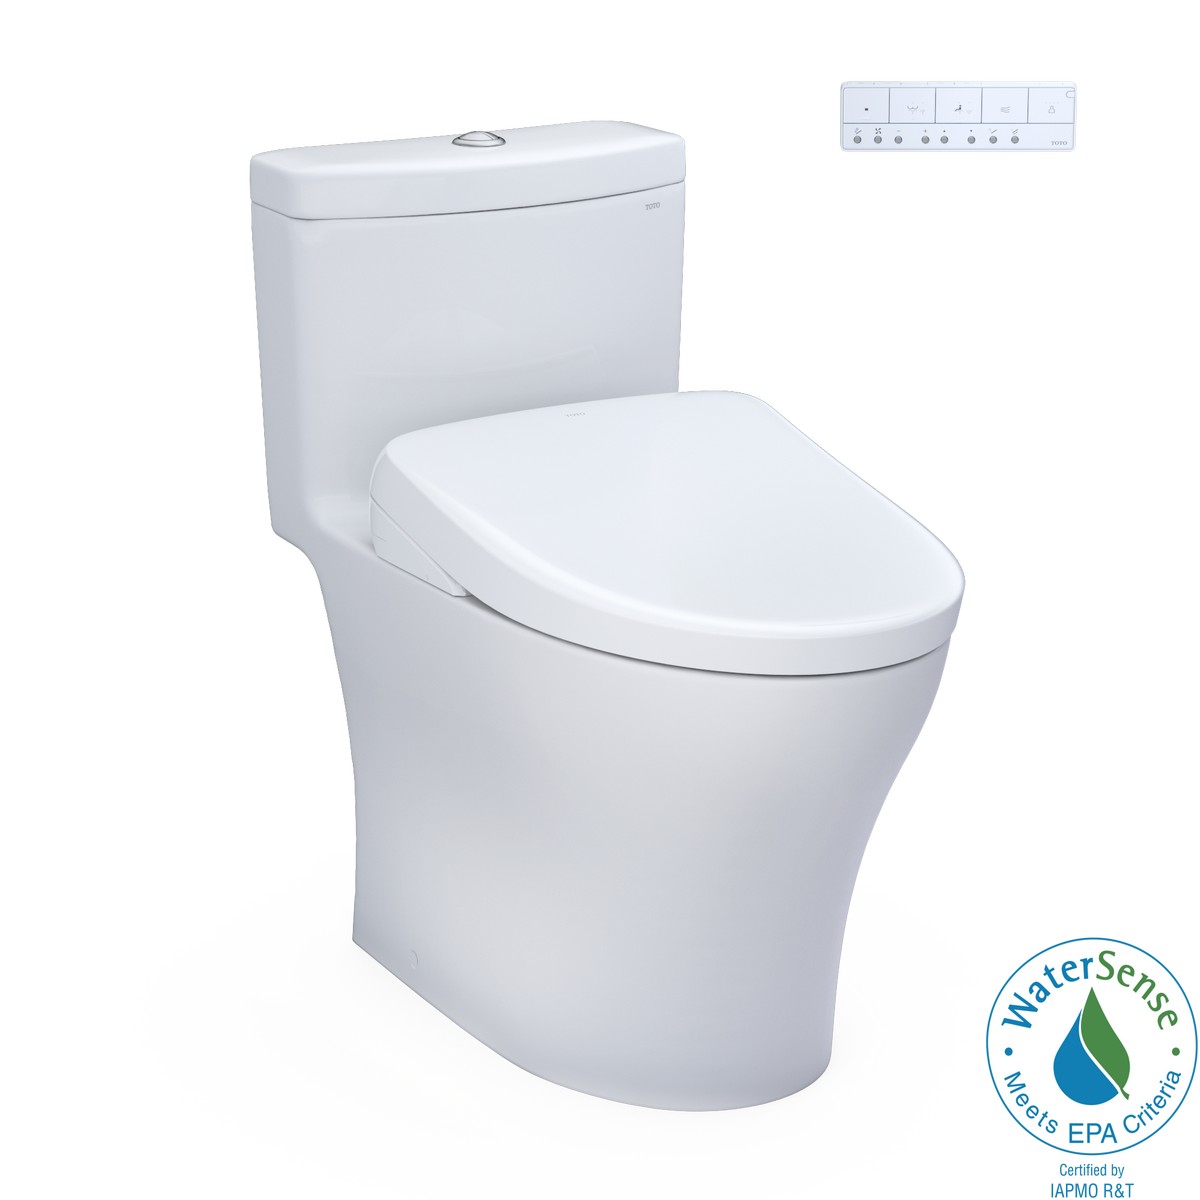 TOTO MW6464726CEMFG#01 WASHLET+ AQUIA IV 1.28 AND 0.9 GPF ONE PIECE DUAL FLUSH ELONGATED TOILET WITH WASHLET S7 ELECTRIC BIDET SEAT IN COTTON WHITE